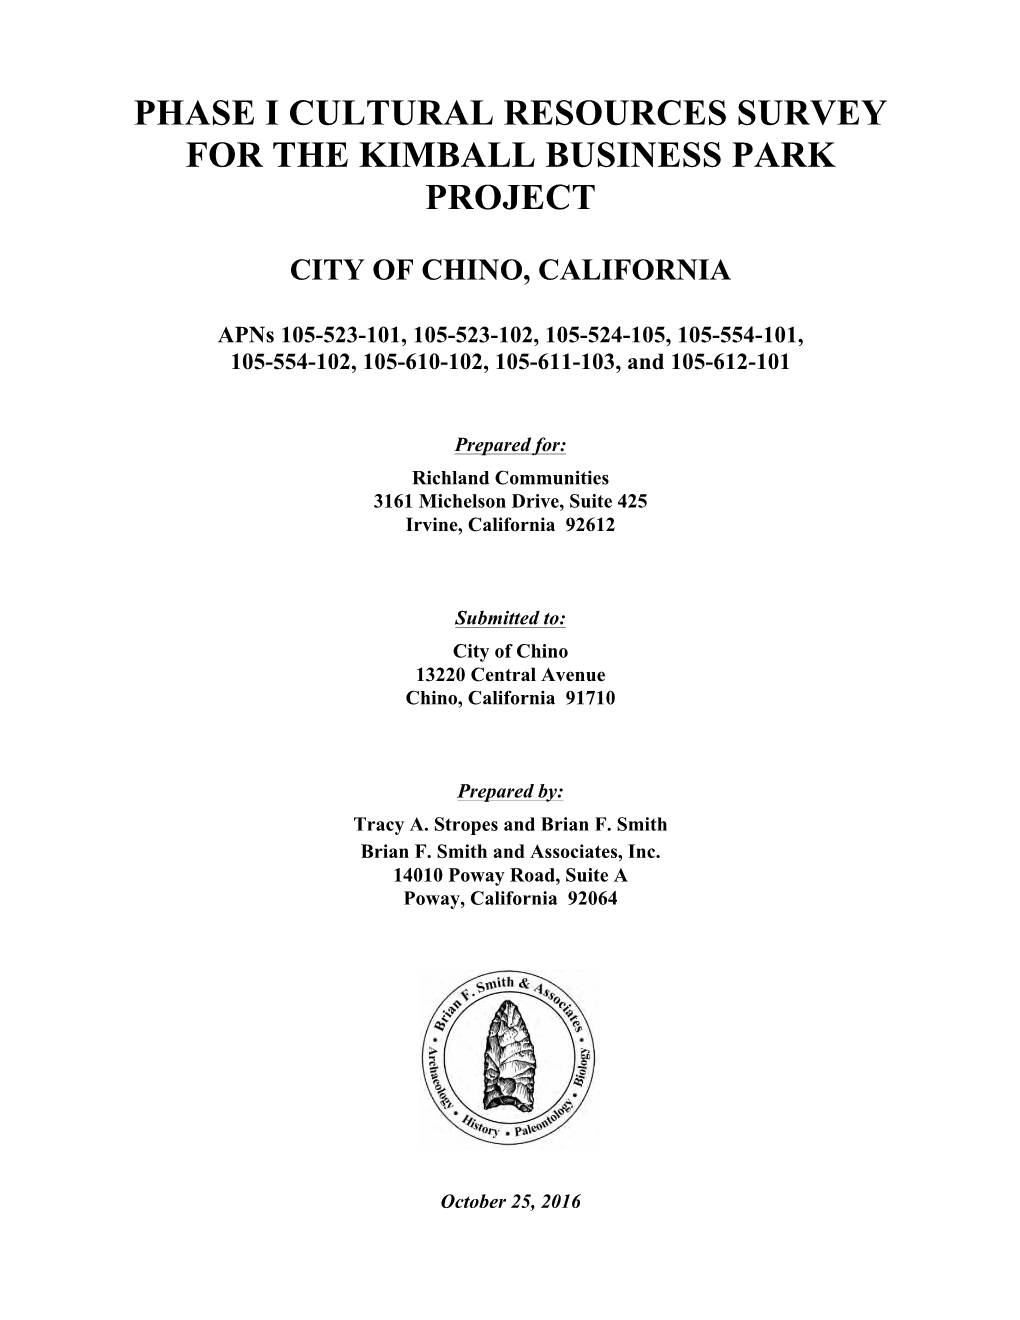 Phase I Cultural Resources Survey for the Kimball Business Park Project